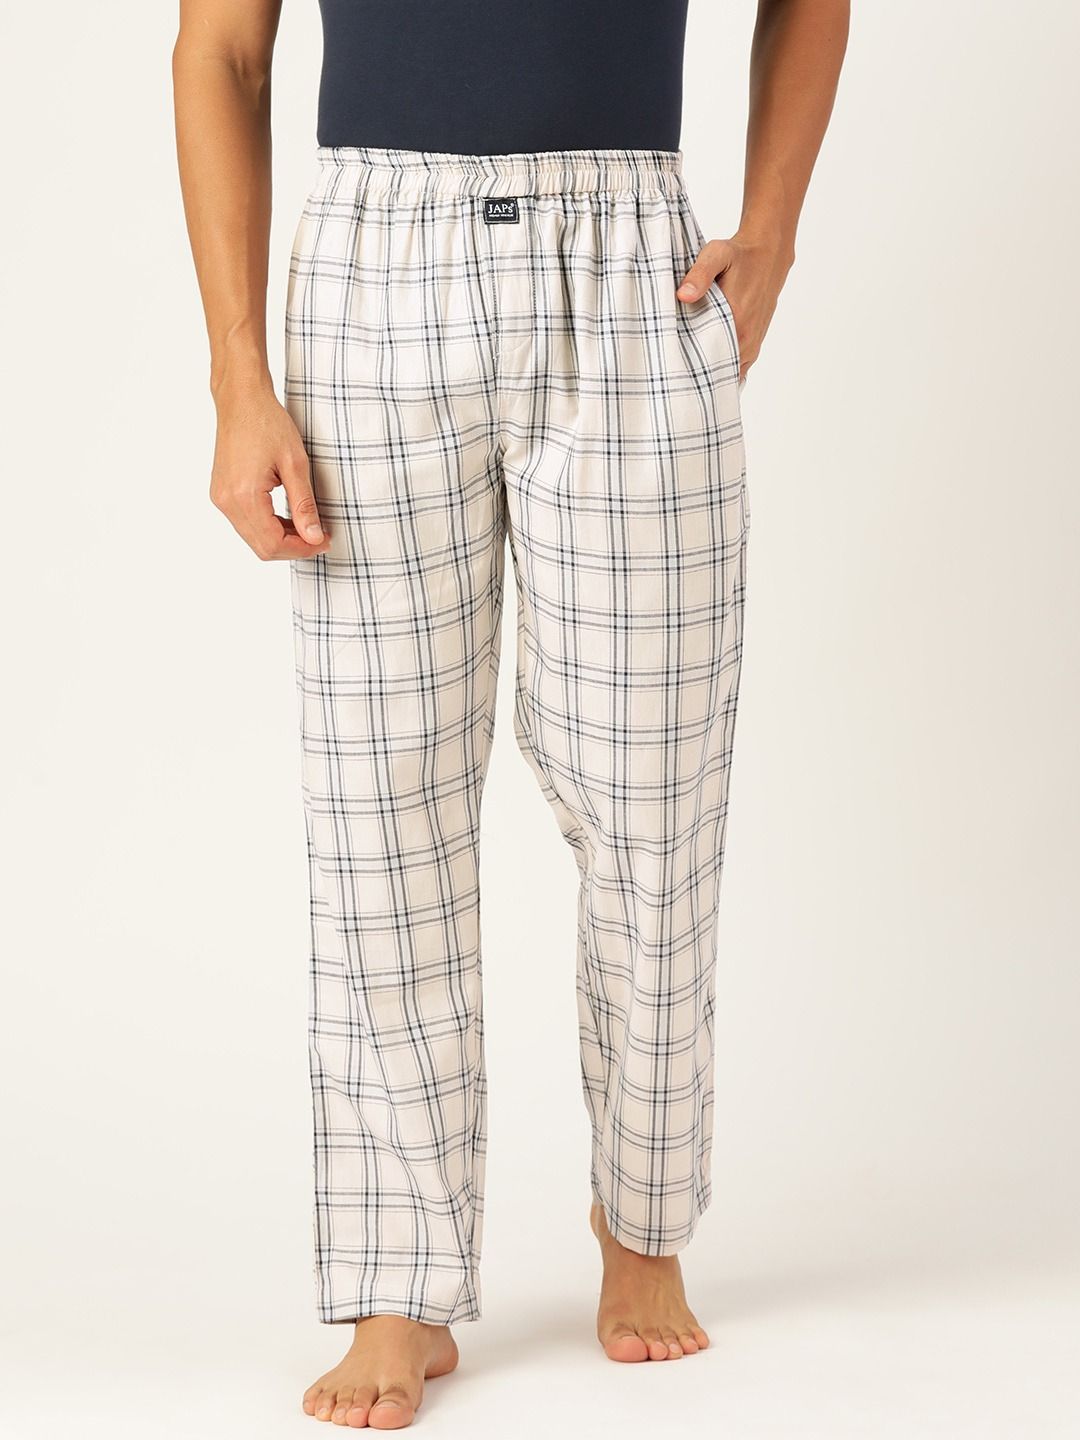 What is the Purpose of Lounge Pants